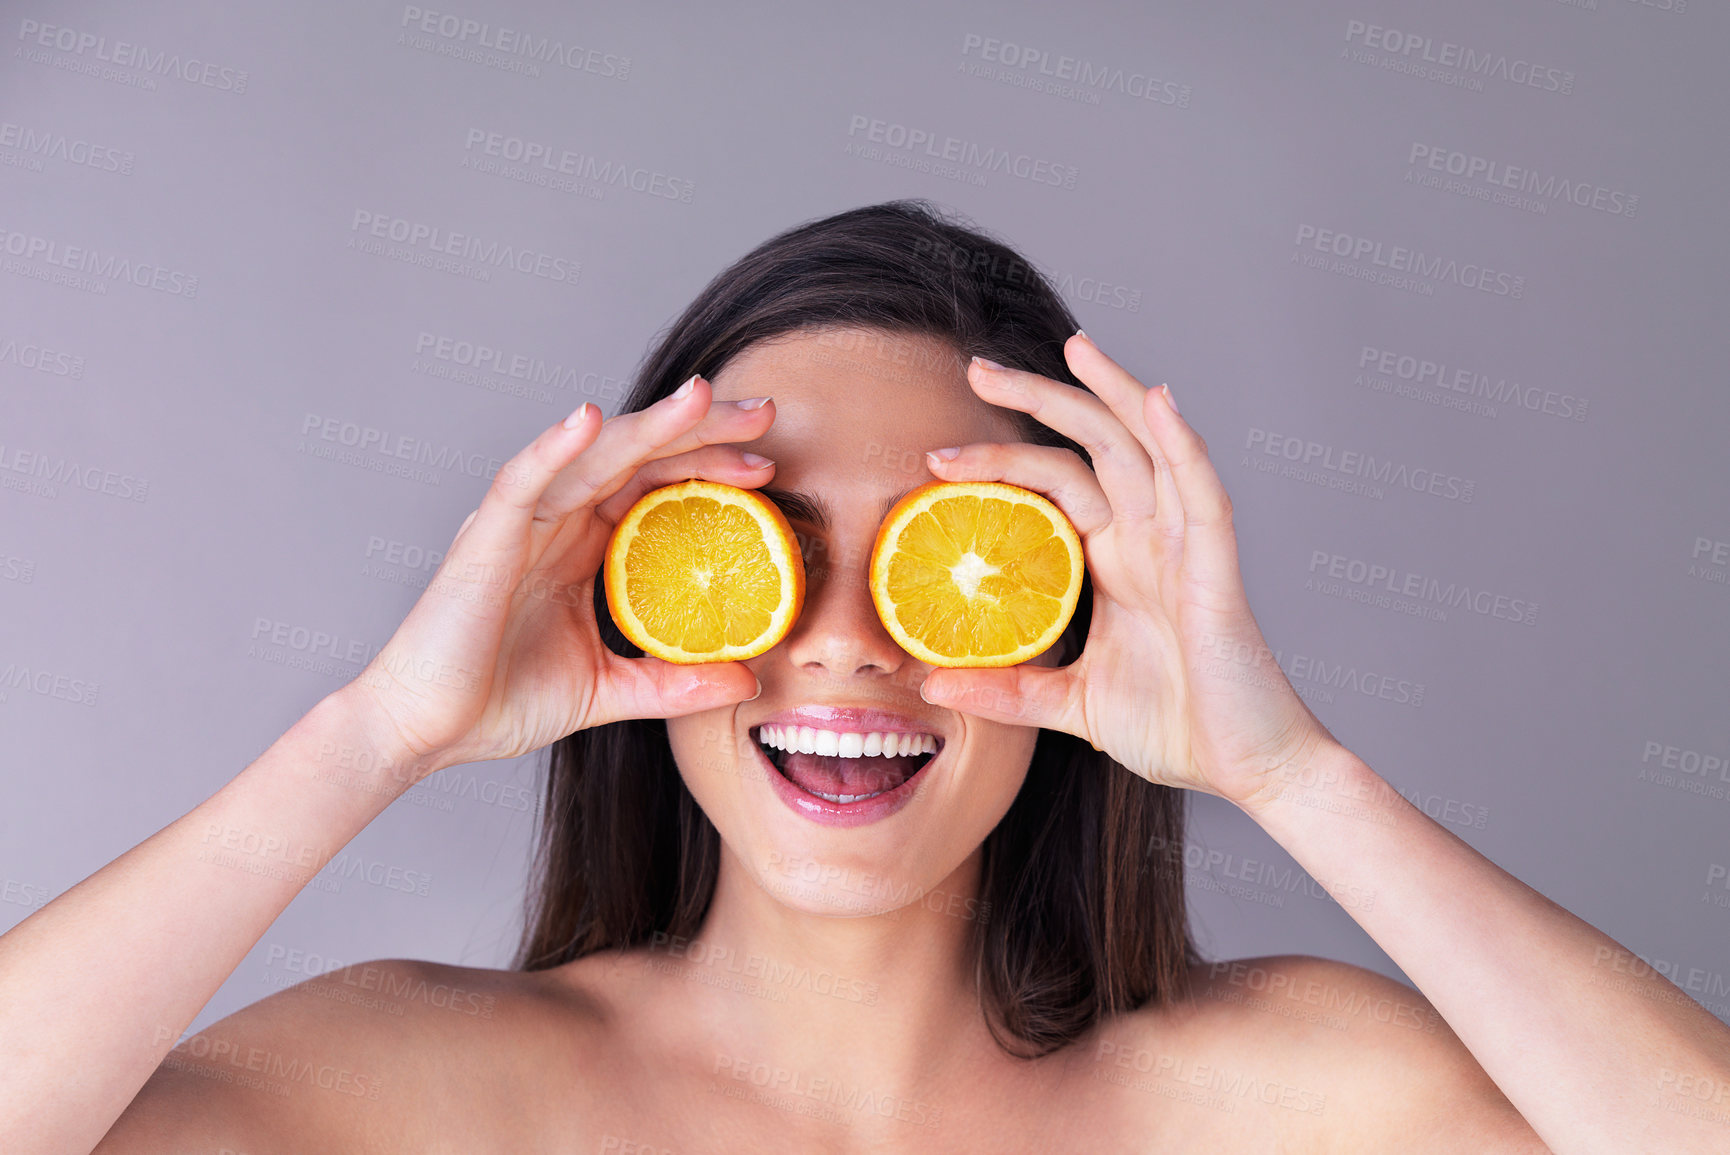 Buy stock photo Studio shot of an attractive young woman holding oranges in front of her eyes against a purple background